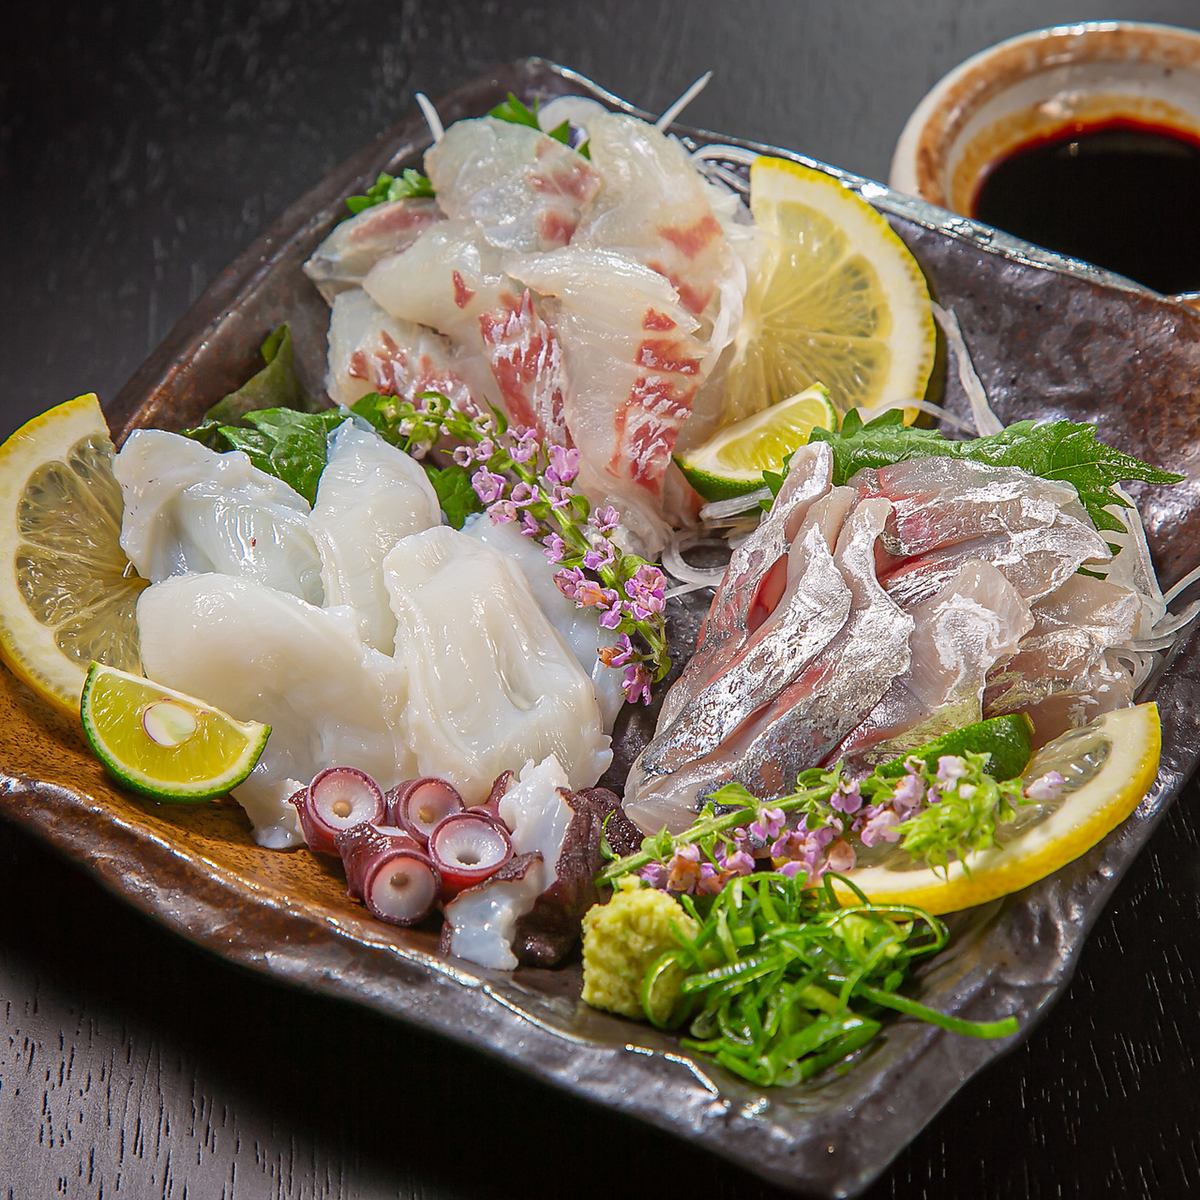 Directly from the production area! Please enjoy the exquisite dishes using fresh fresh fish.